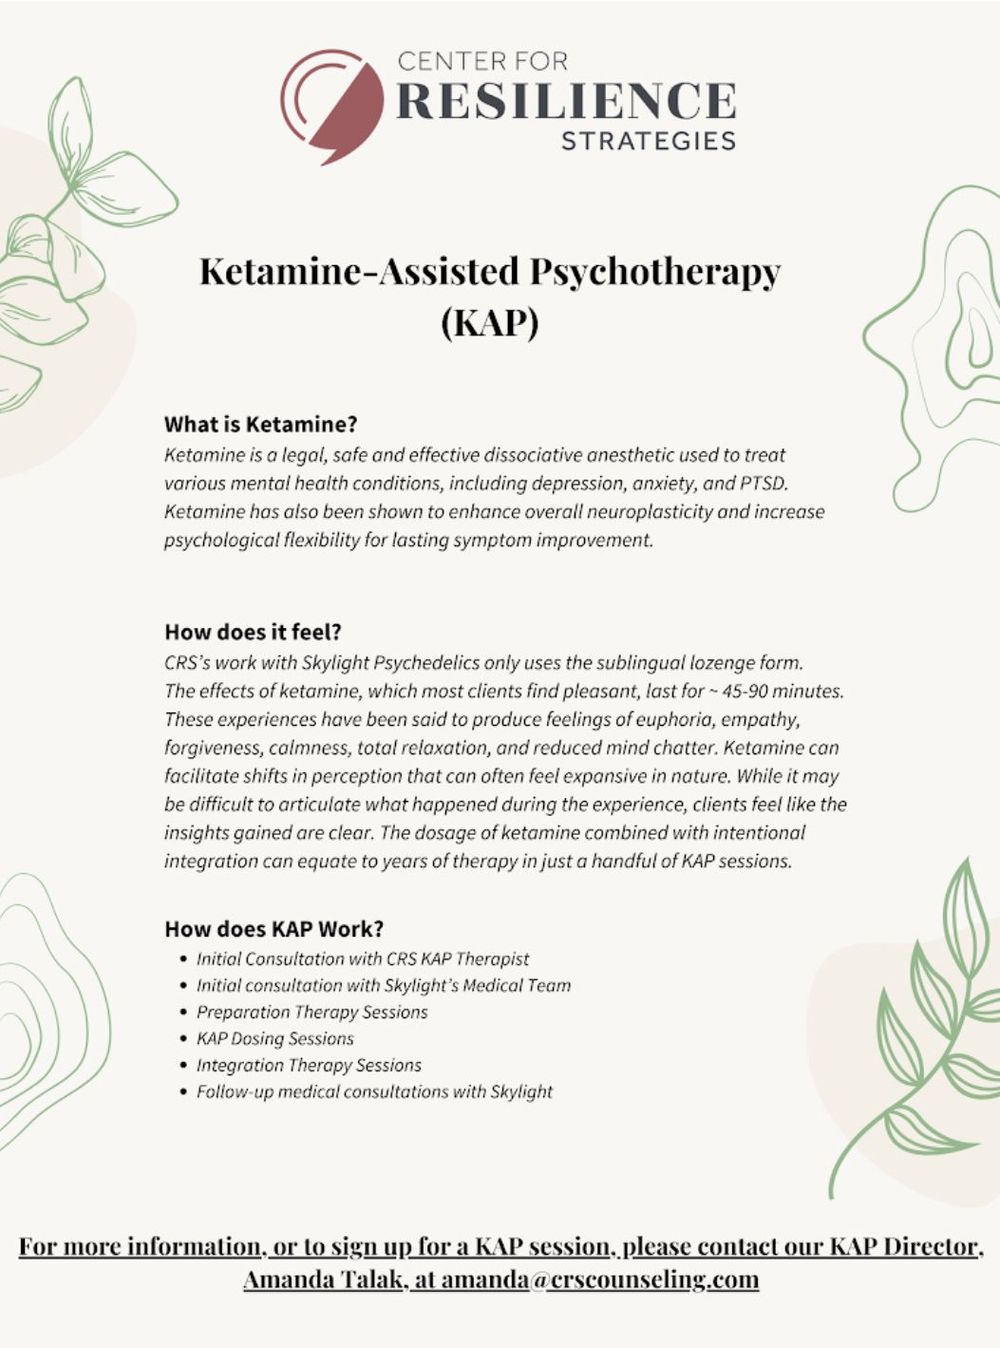 Information about Ketamine-Assisted Psychotherapy